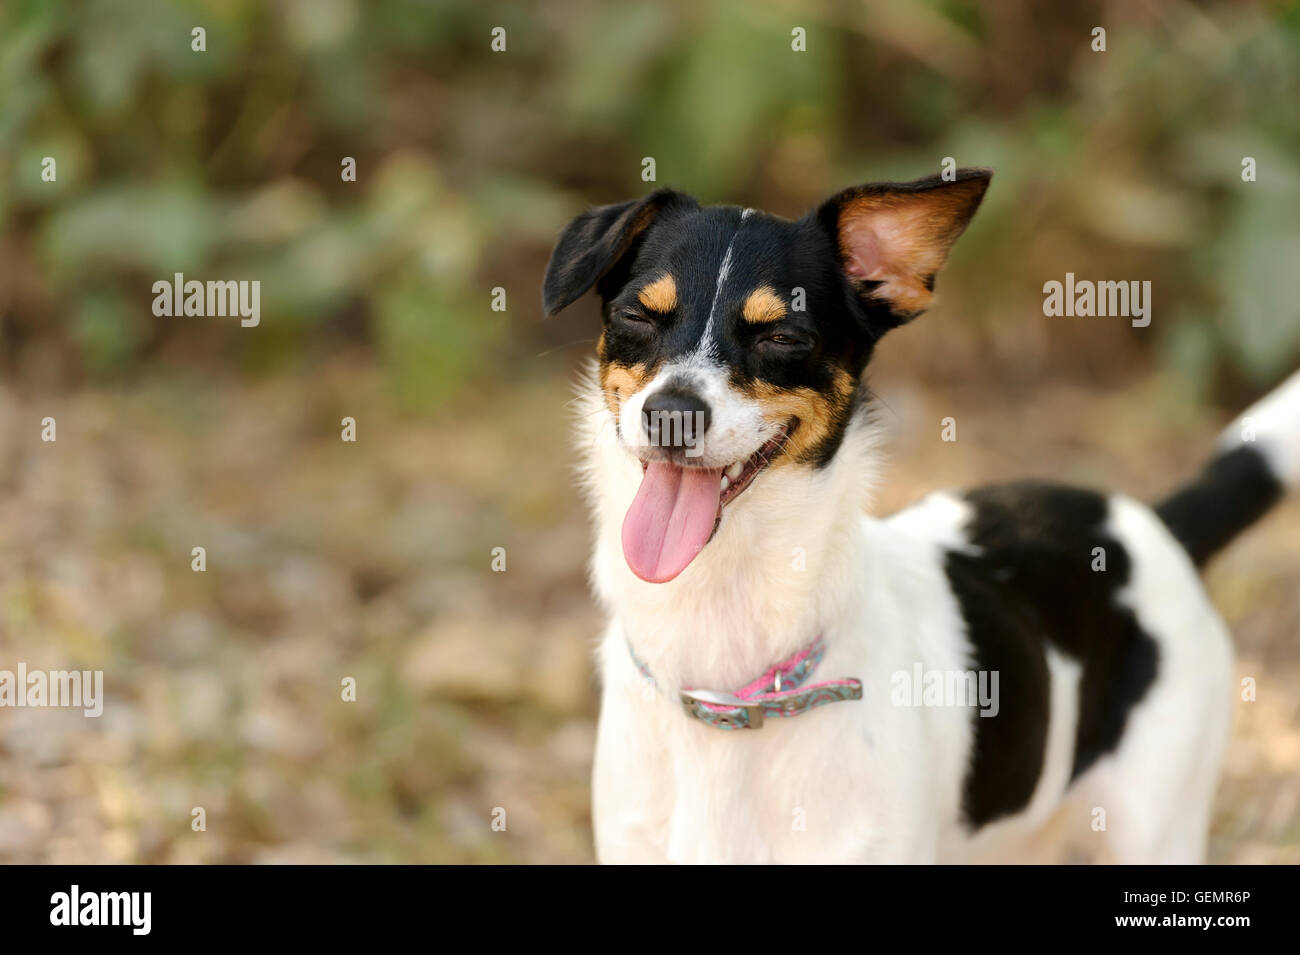 Laughing dog is a silly funny dog having a great big happy uncontrollable laugh. Stock Photo